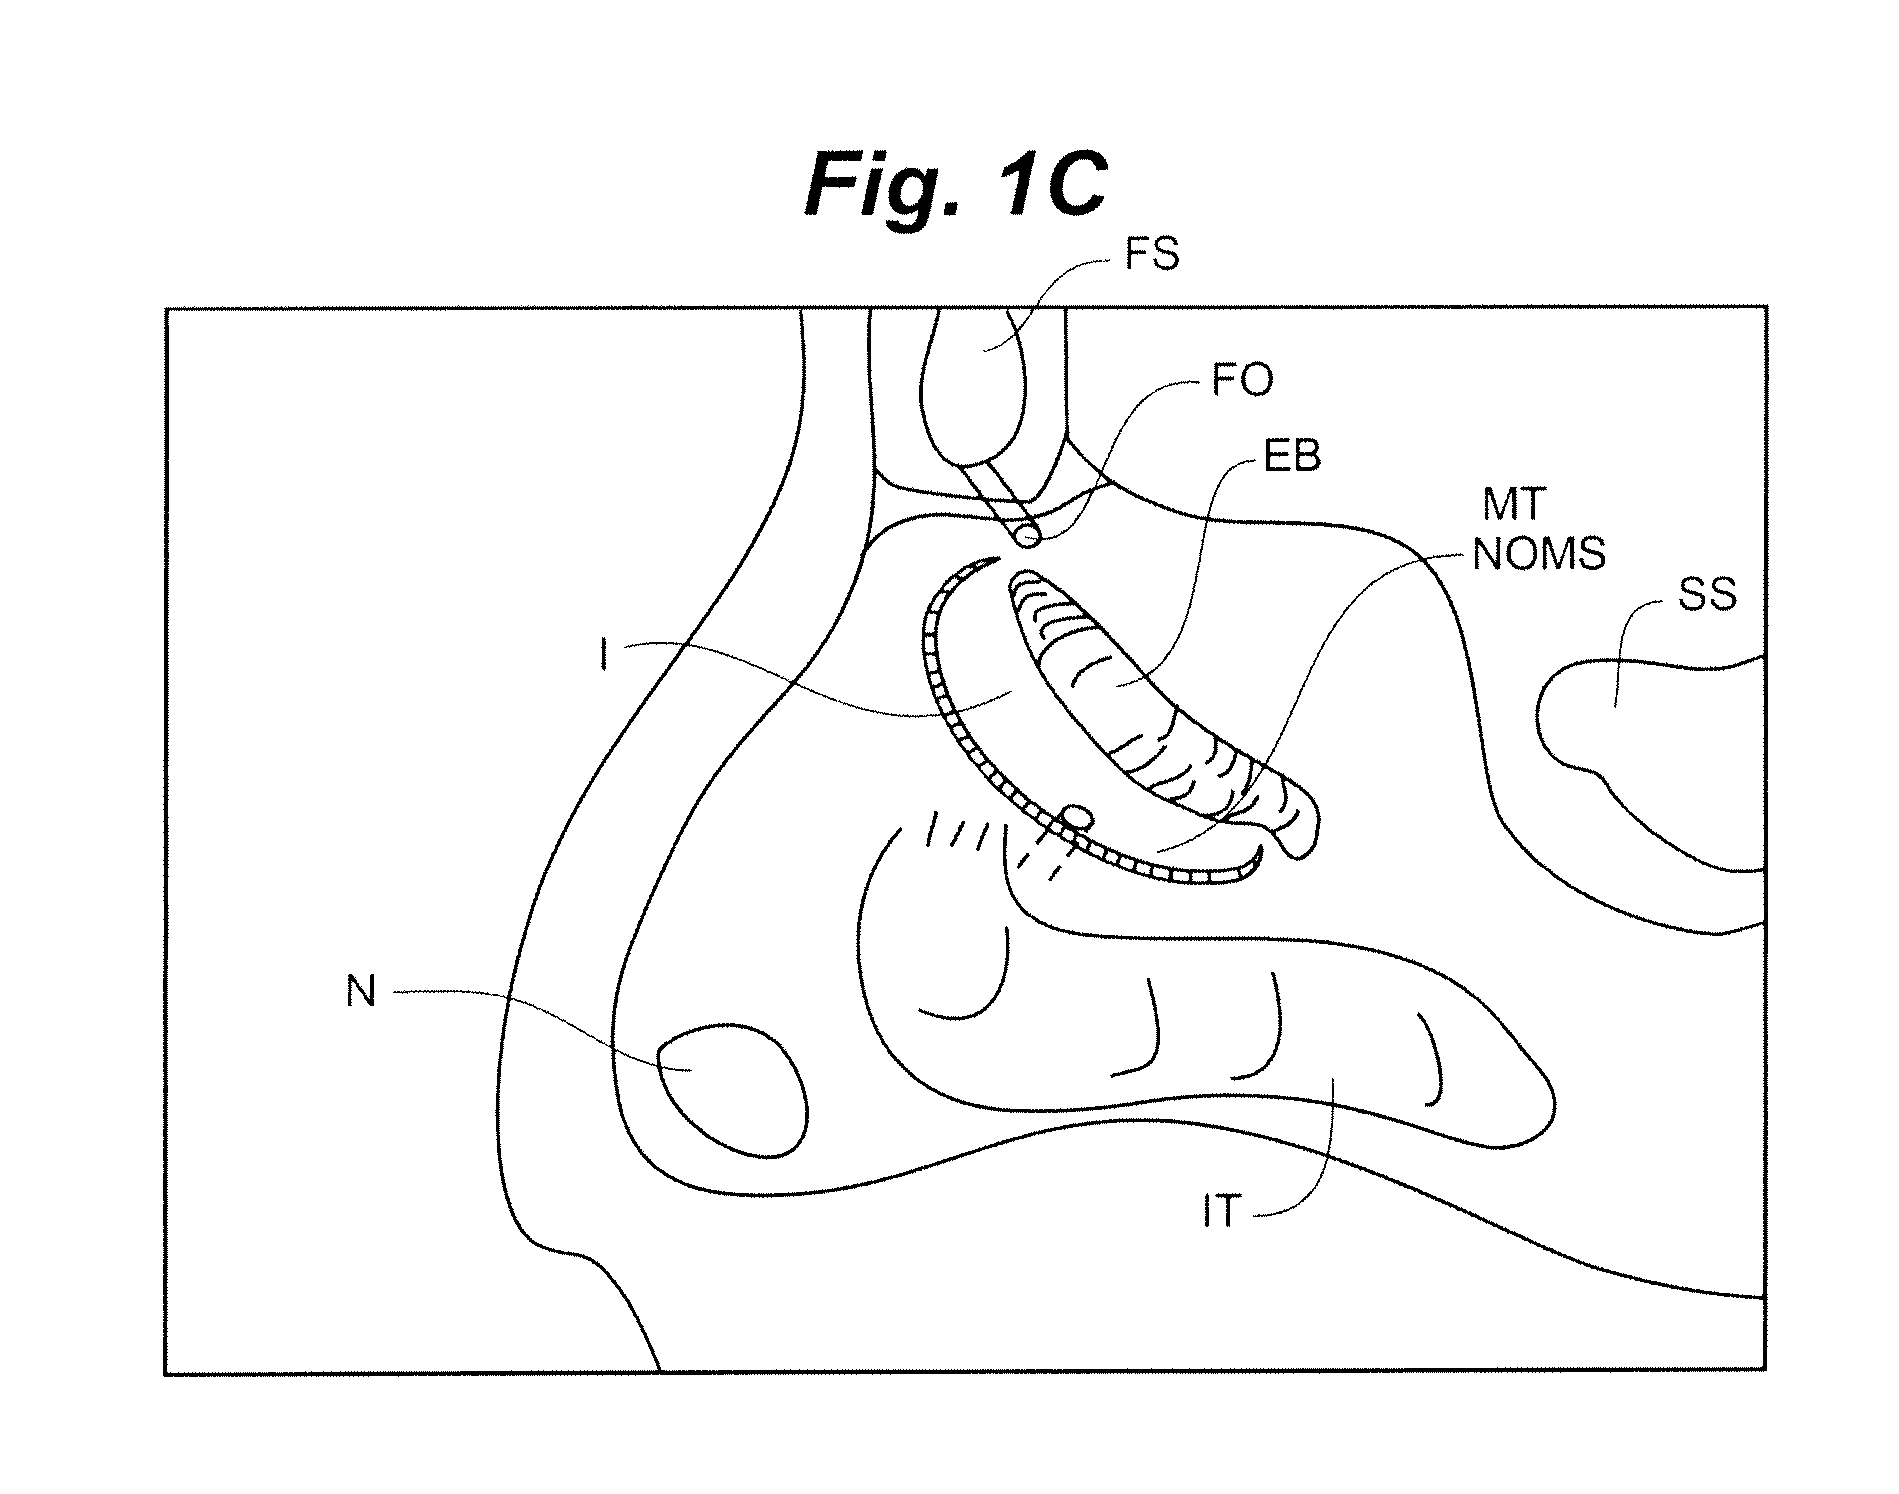 Devices and Methods for Minimally Invasive Access to Sinuses and Treatment of Sinusitis